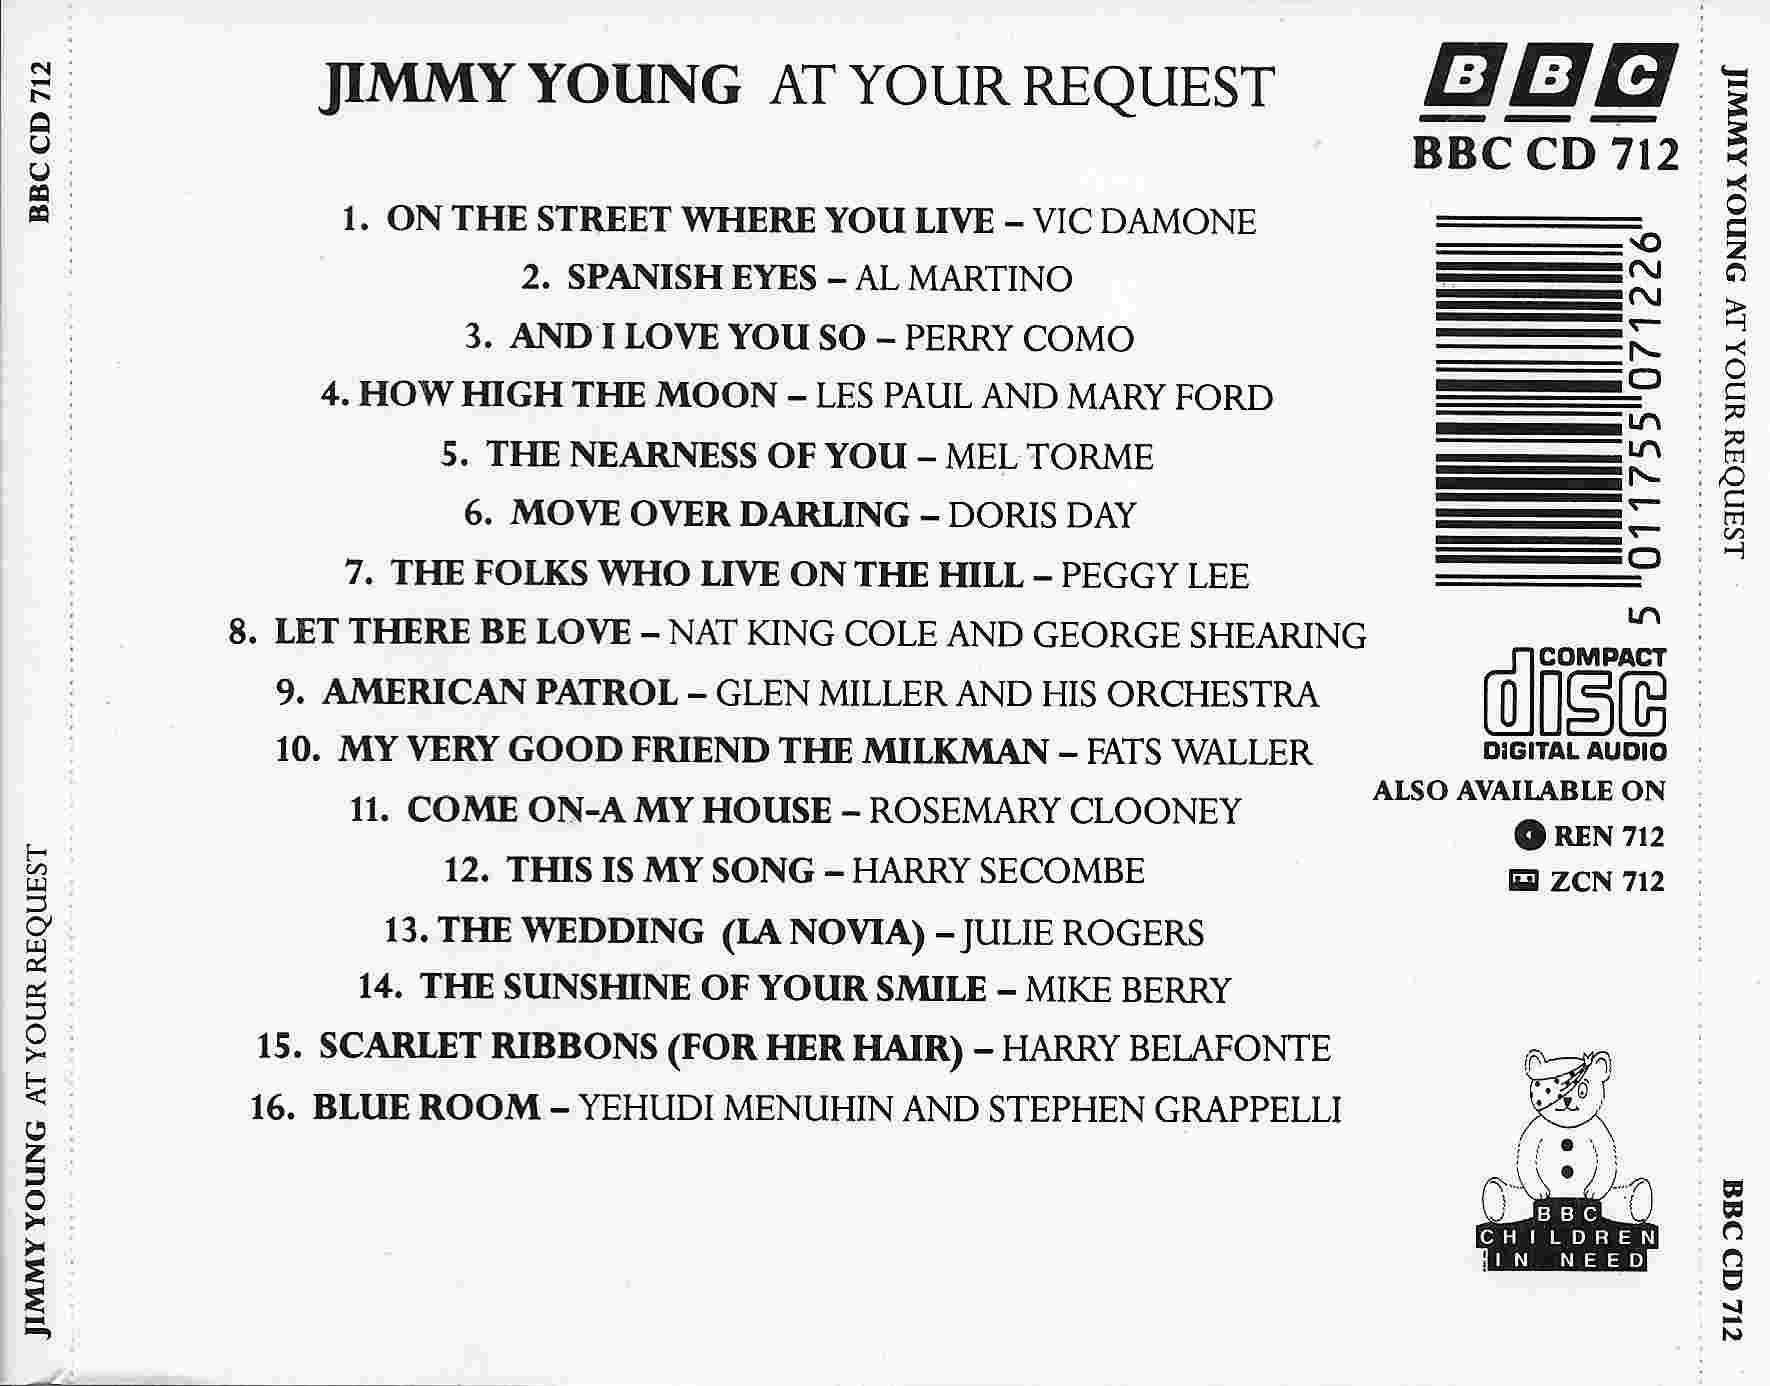 Picture of BBCCD712 At your request - Jimmy Young by artist Jimmy Young from the BBC records and Tapes library